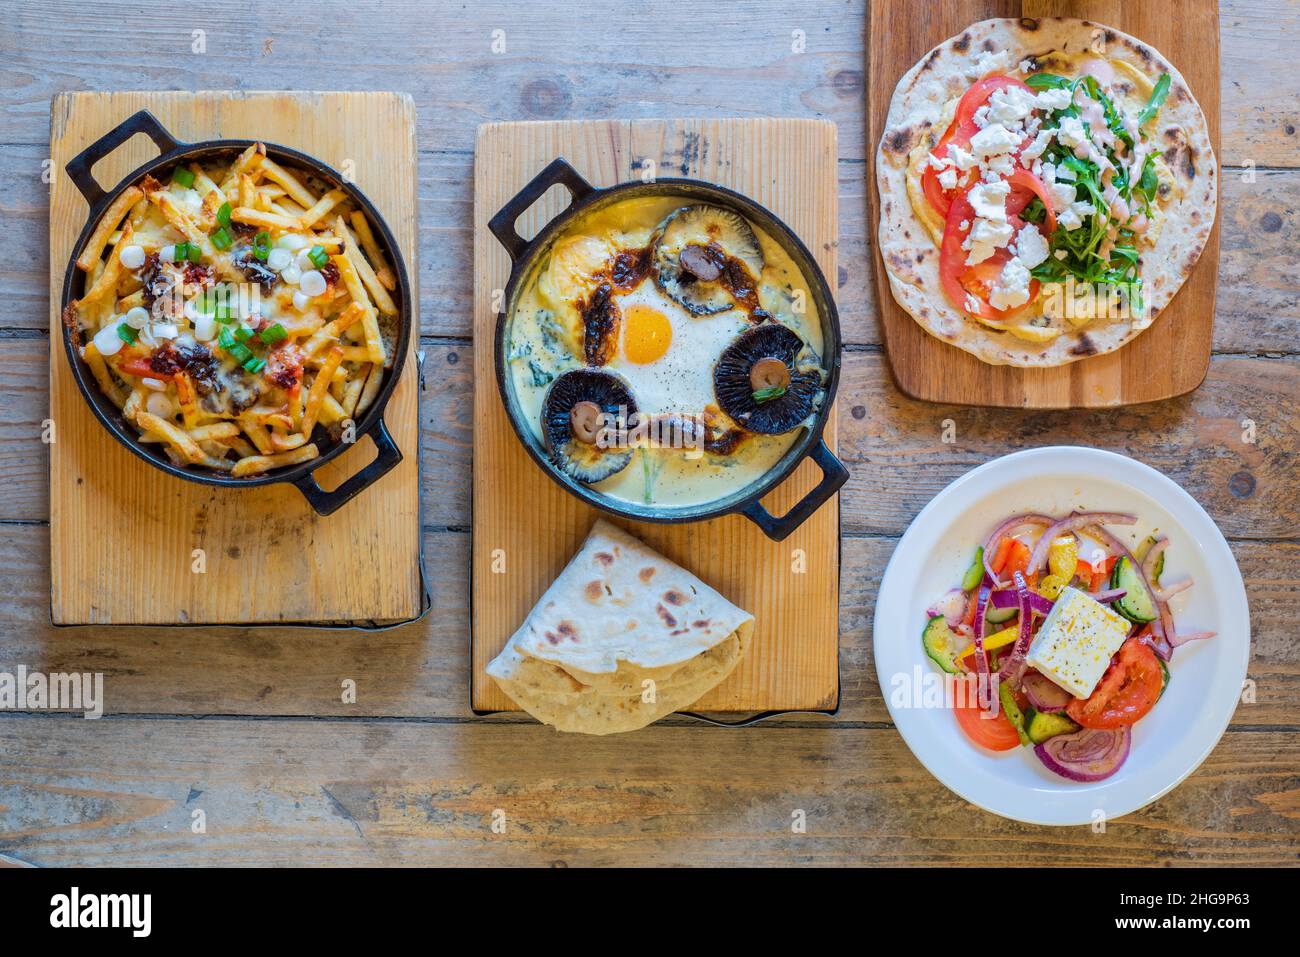 Delicious artisan cast iron skillet cheesy egg and mushroom sizzler and loaded fries, chicken wrap and feta salad shot from above Stock Photo